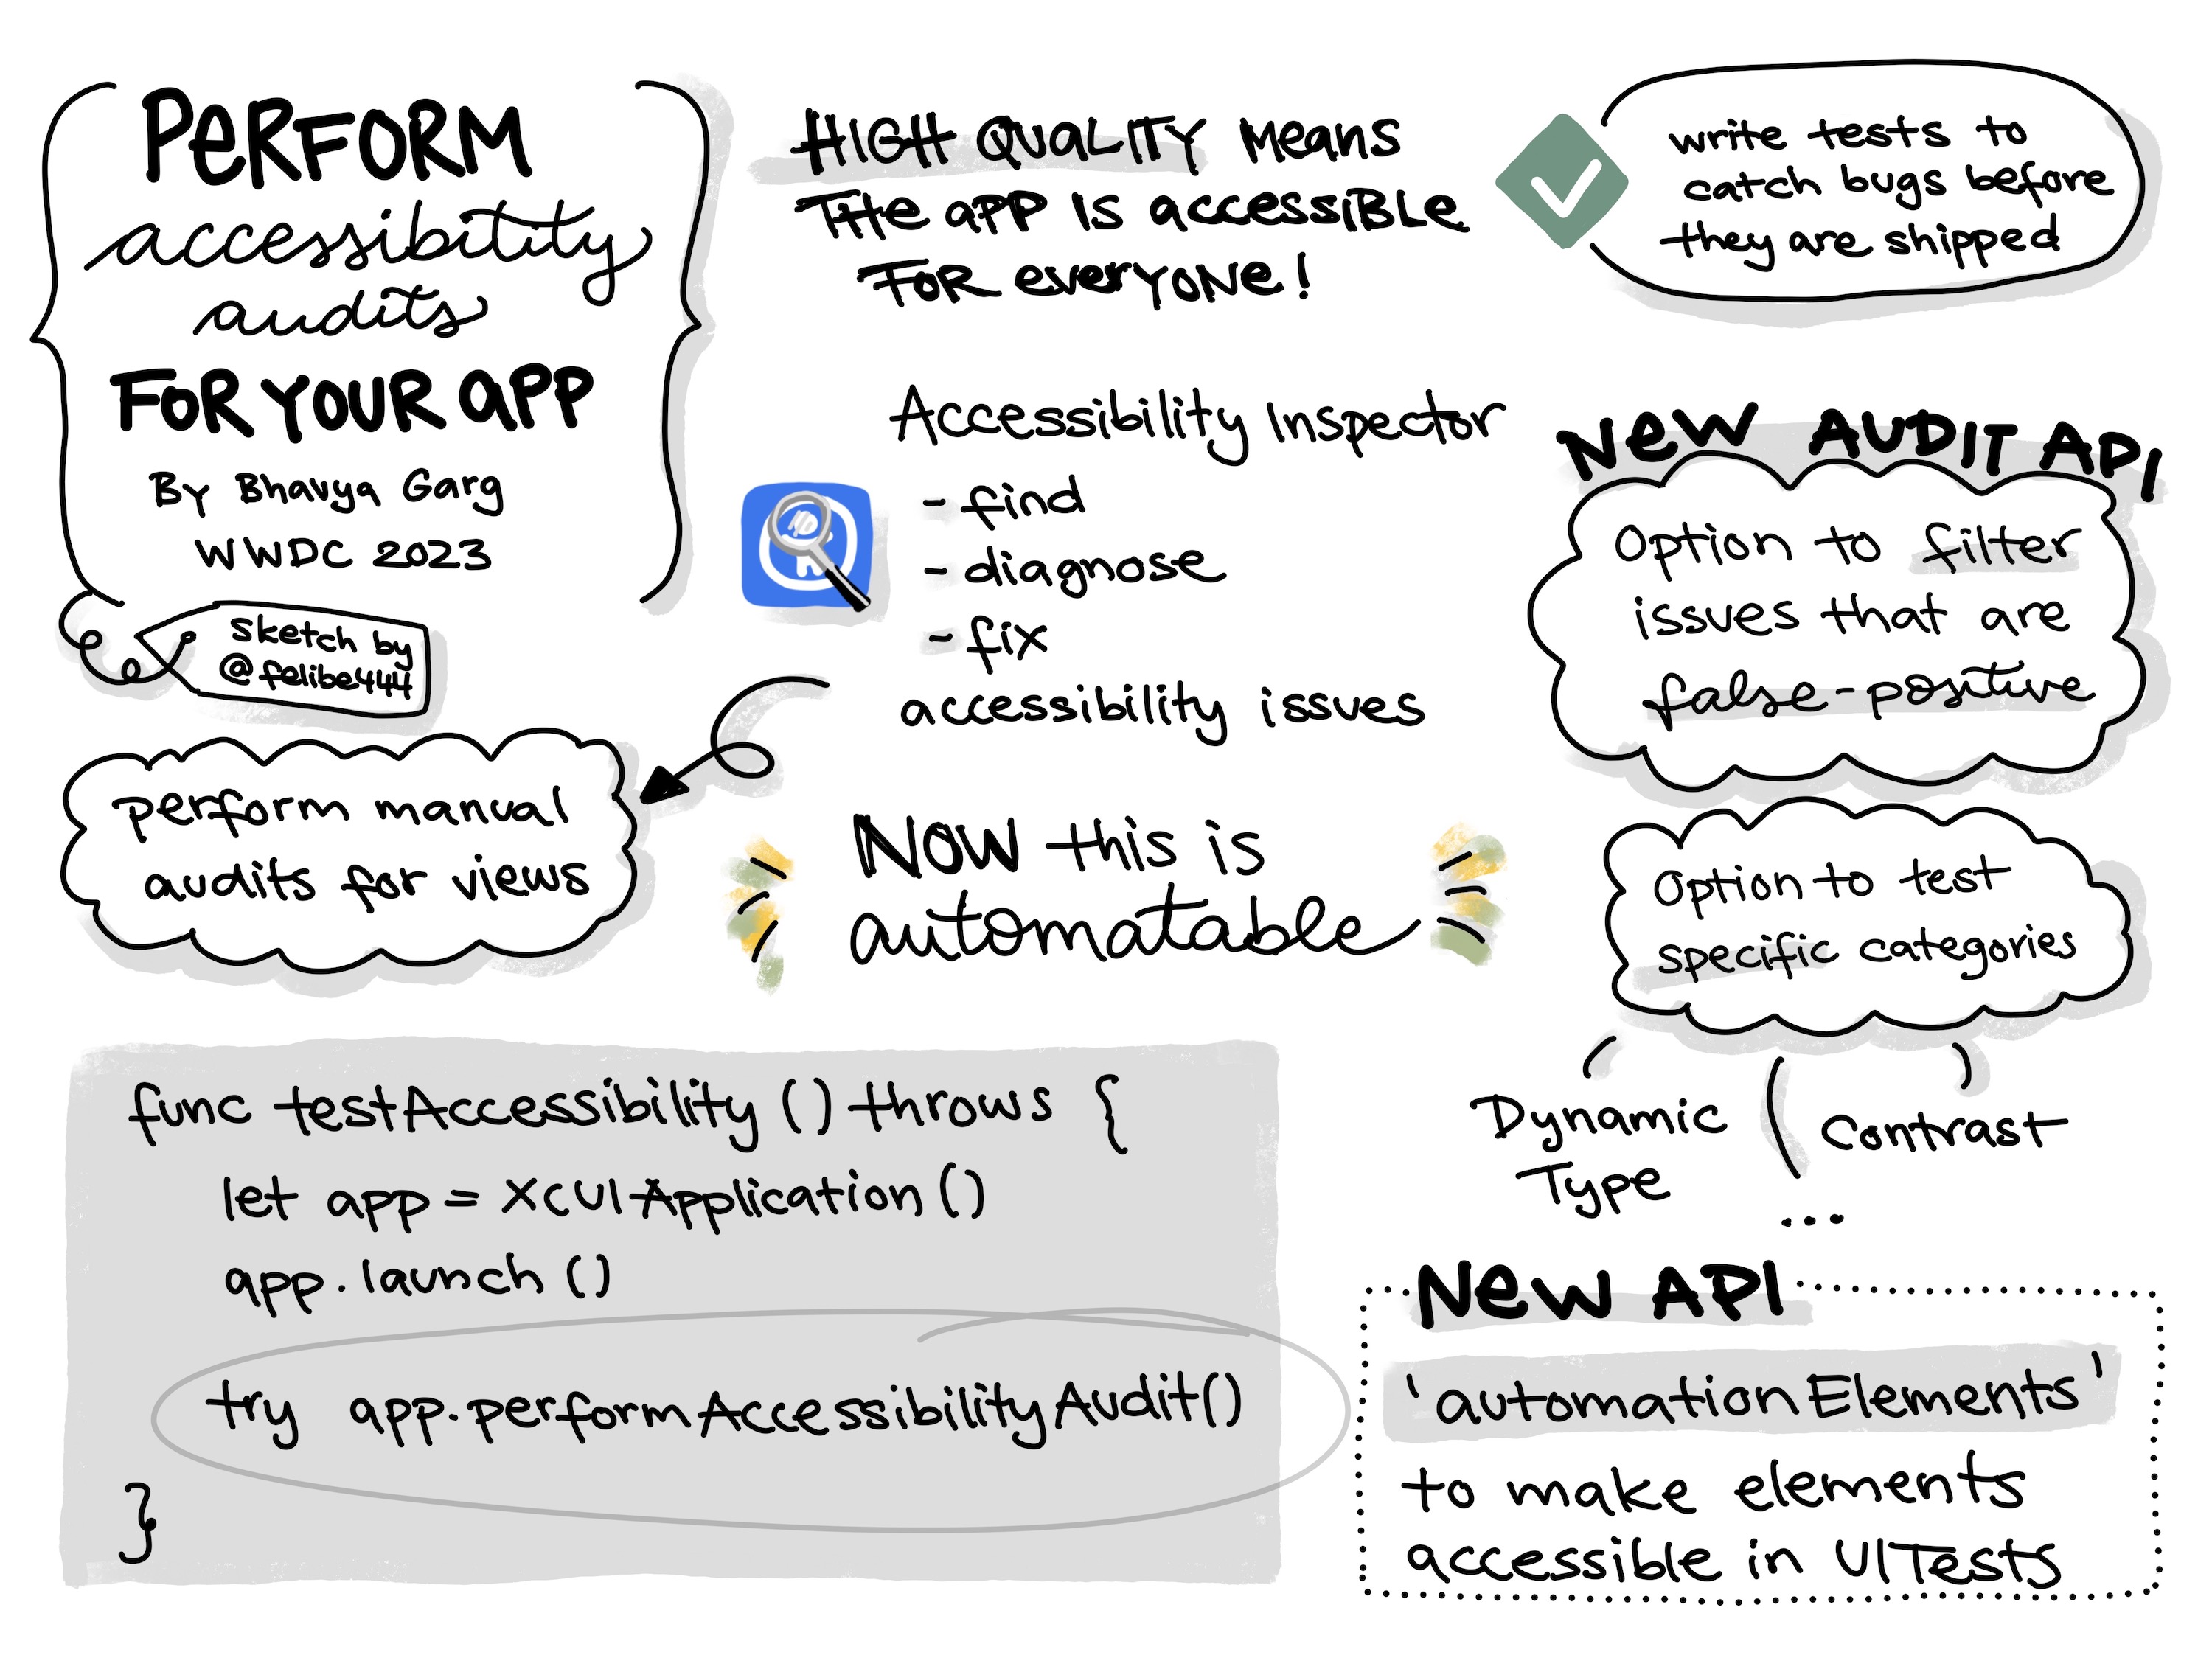 Sketchnote of WWDC 2023 talk about how to perform accessibility audits for your app